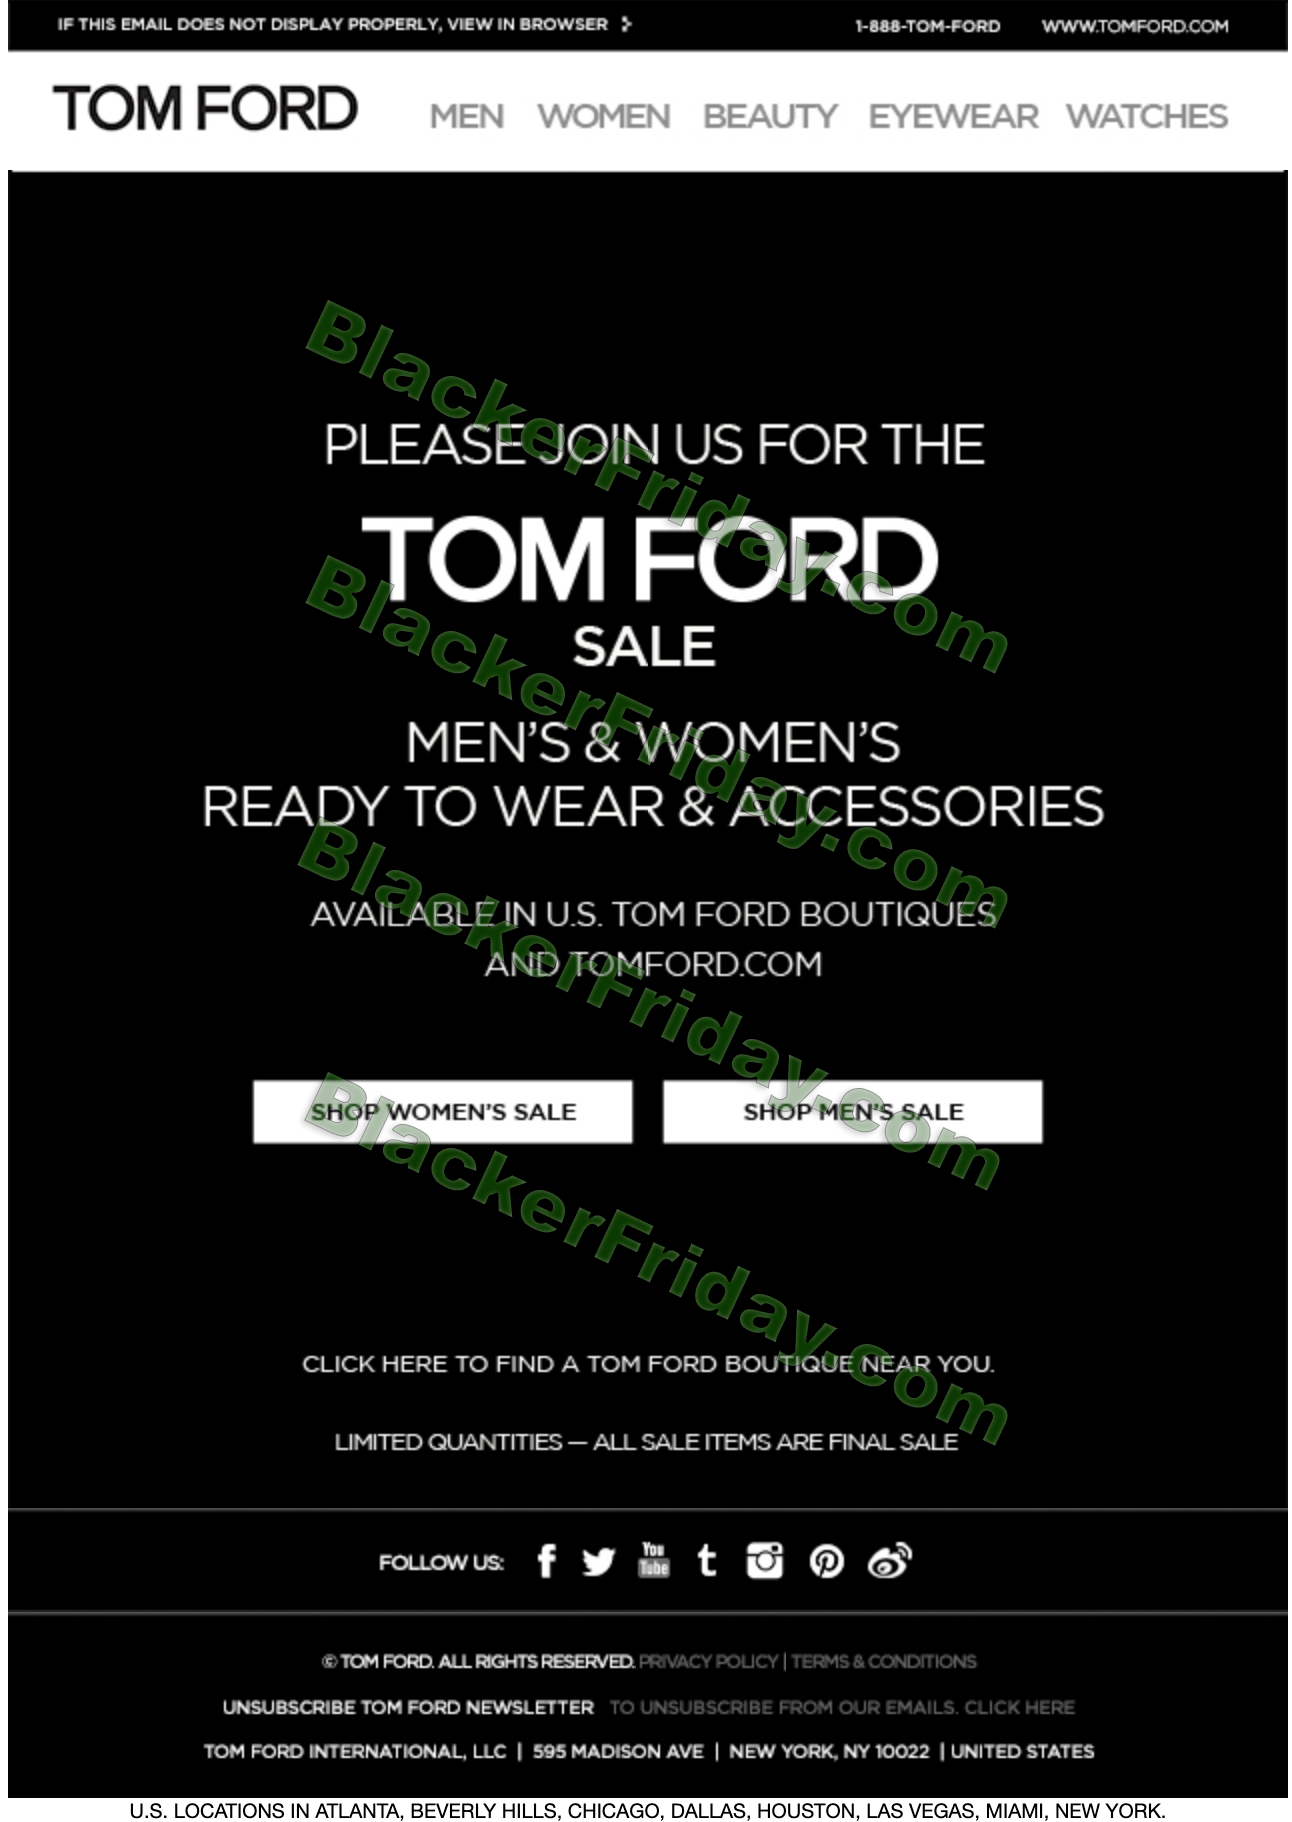 Tom Ford Black Friday 21 Sale What To Expect Blacker Friday